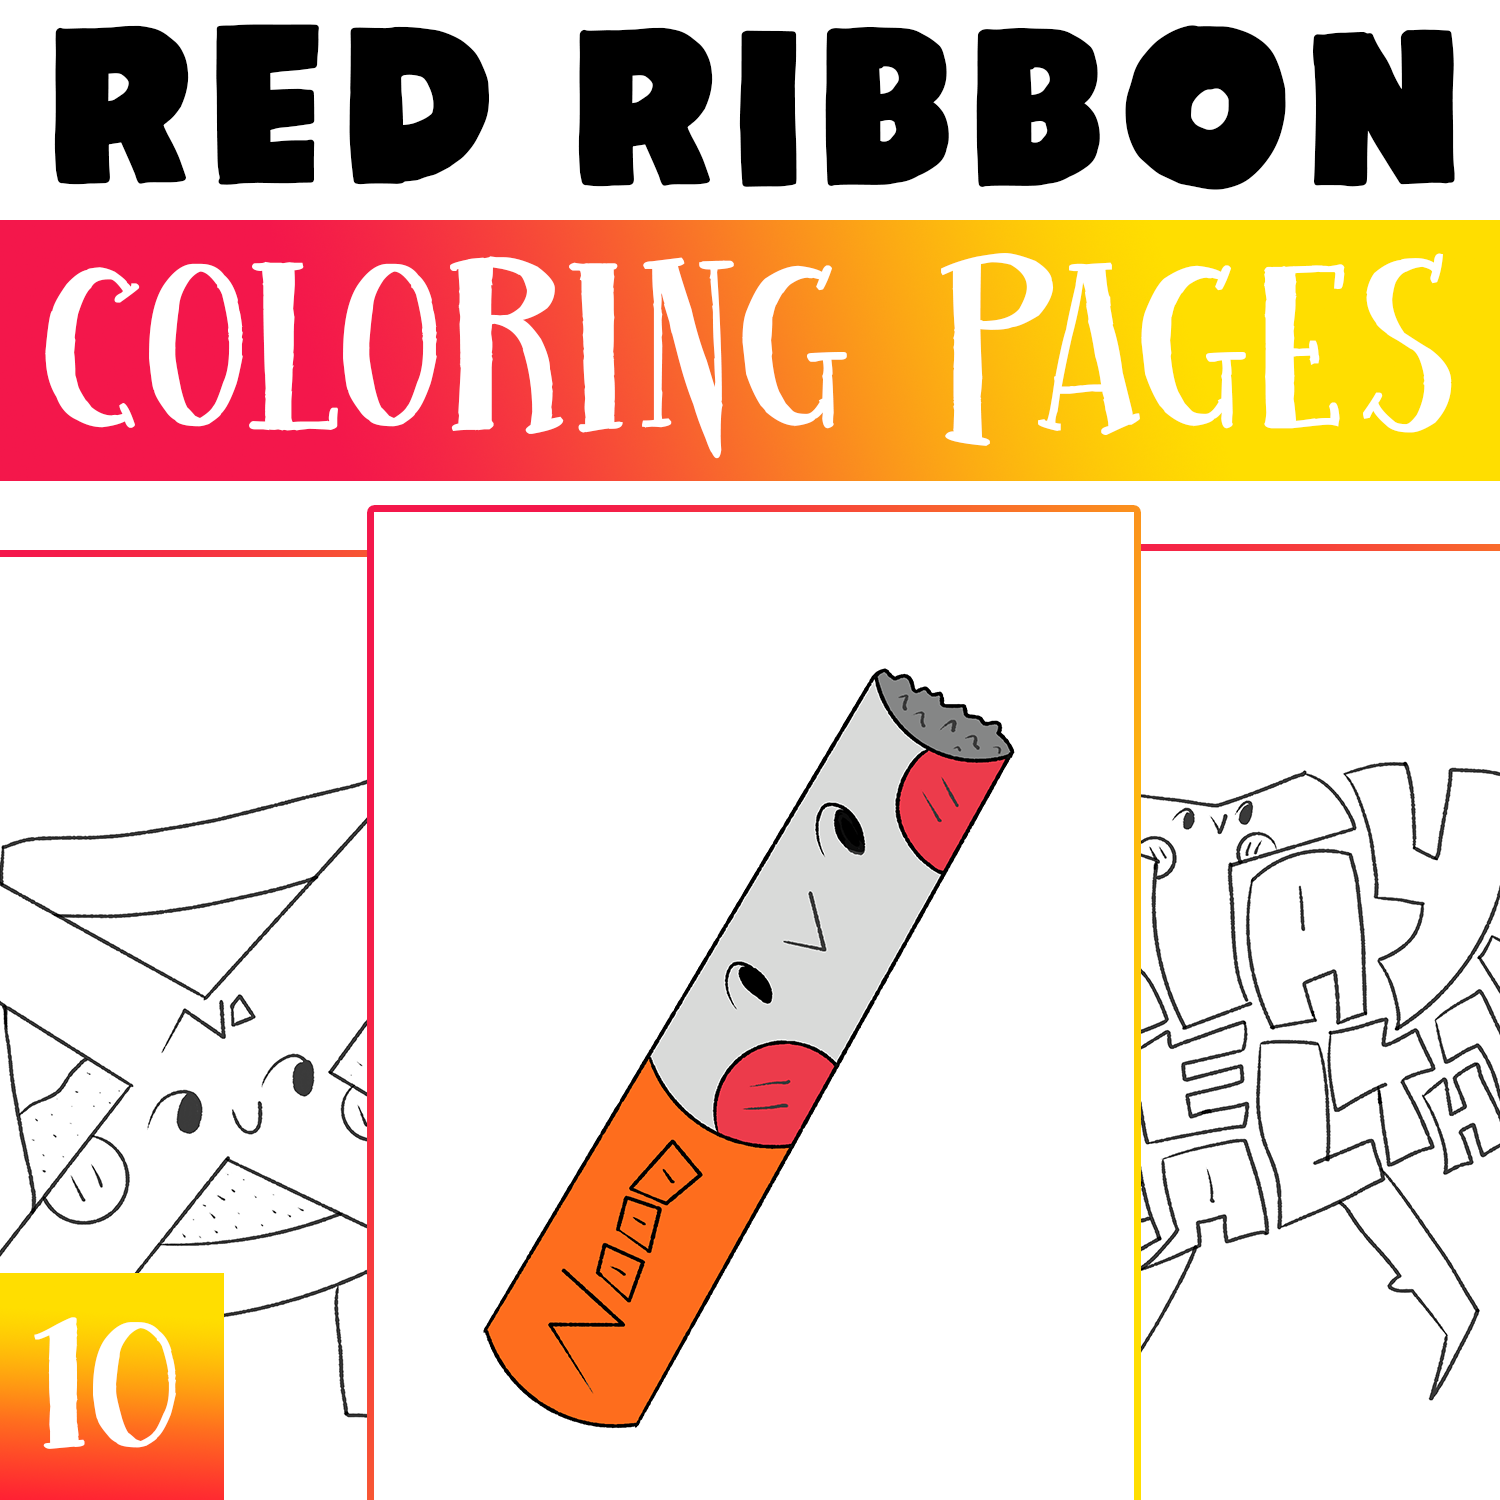 Red ribbon week coloring pages drug free coloring worksheets activity made by teachers